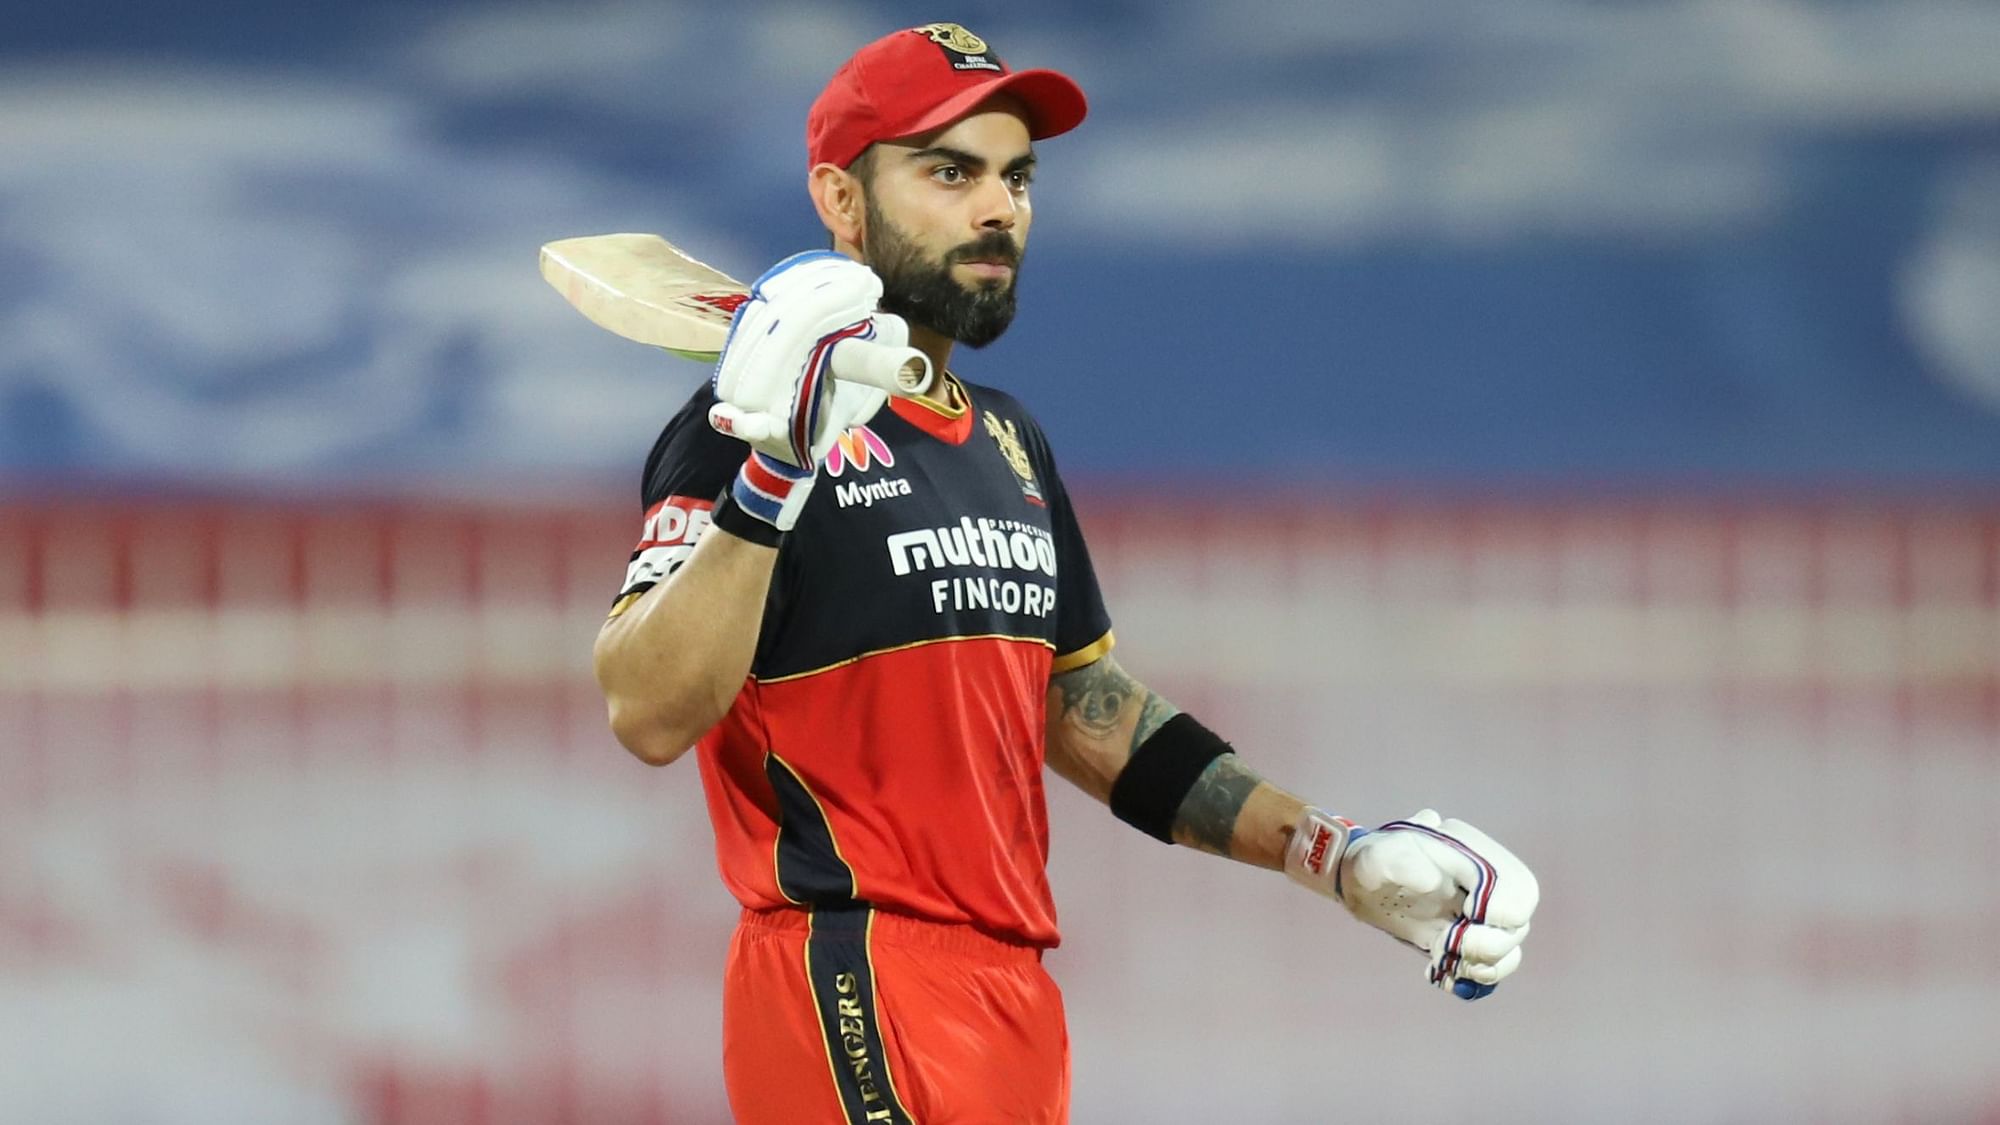 RCB captain Virat Kohli’s decision to send AB de Villiers in at No. 6 against Kings XI Punjab (KXIP) has been criticised. 